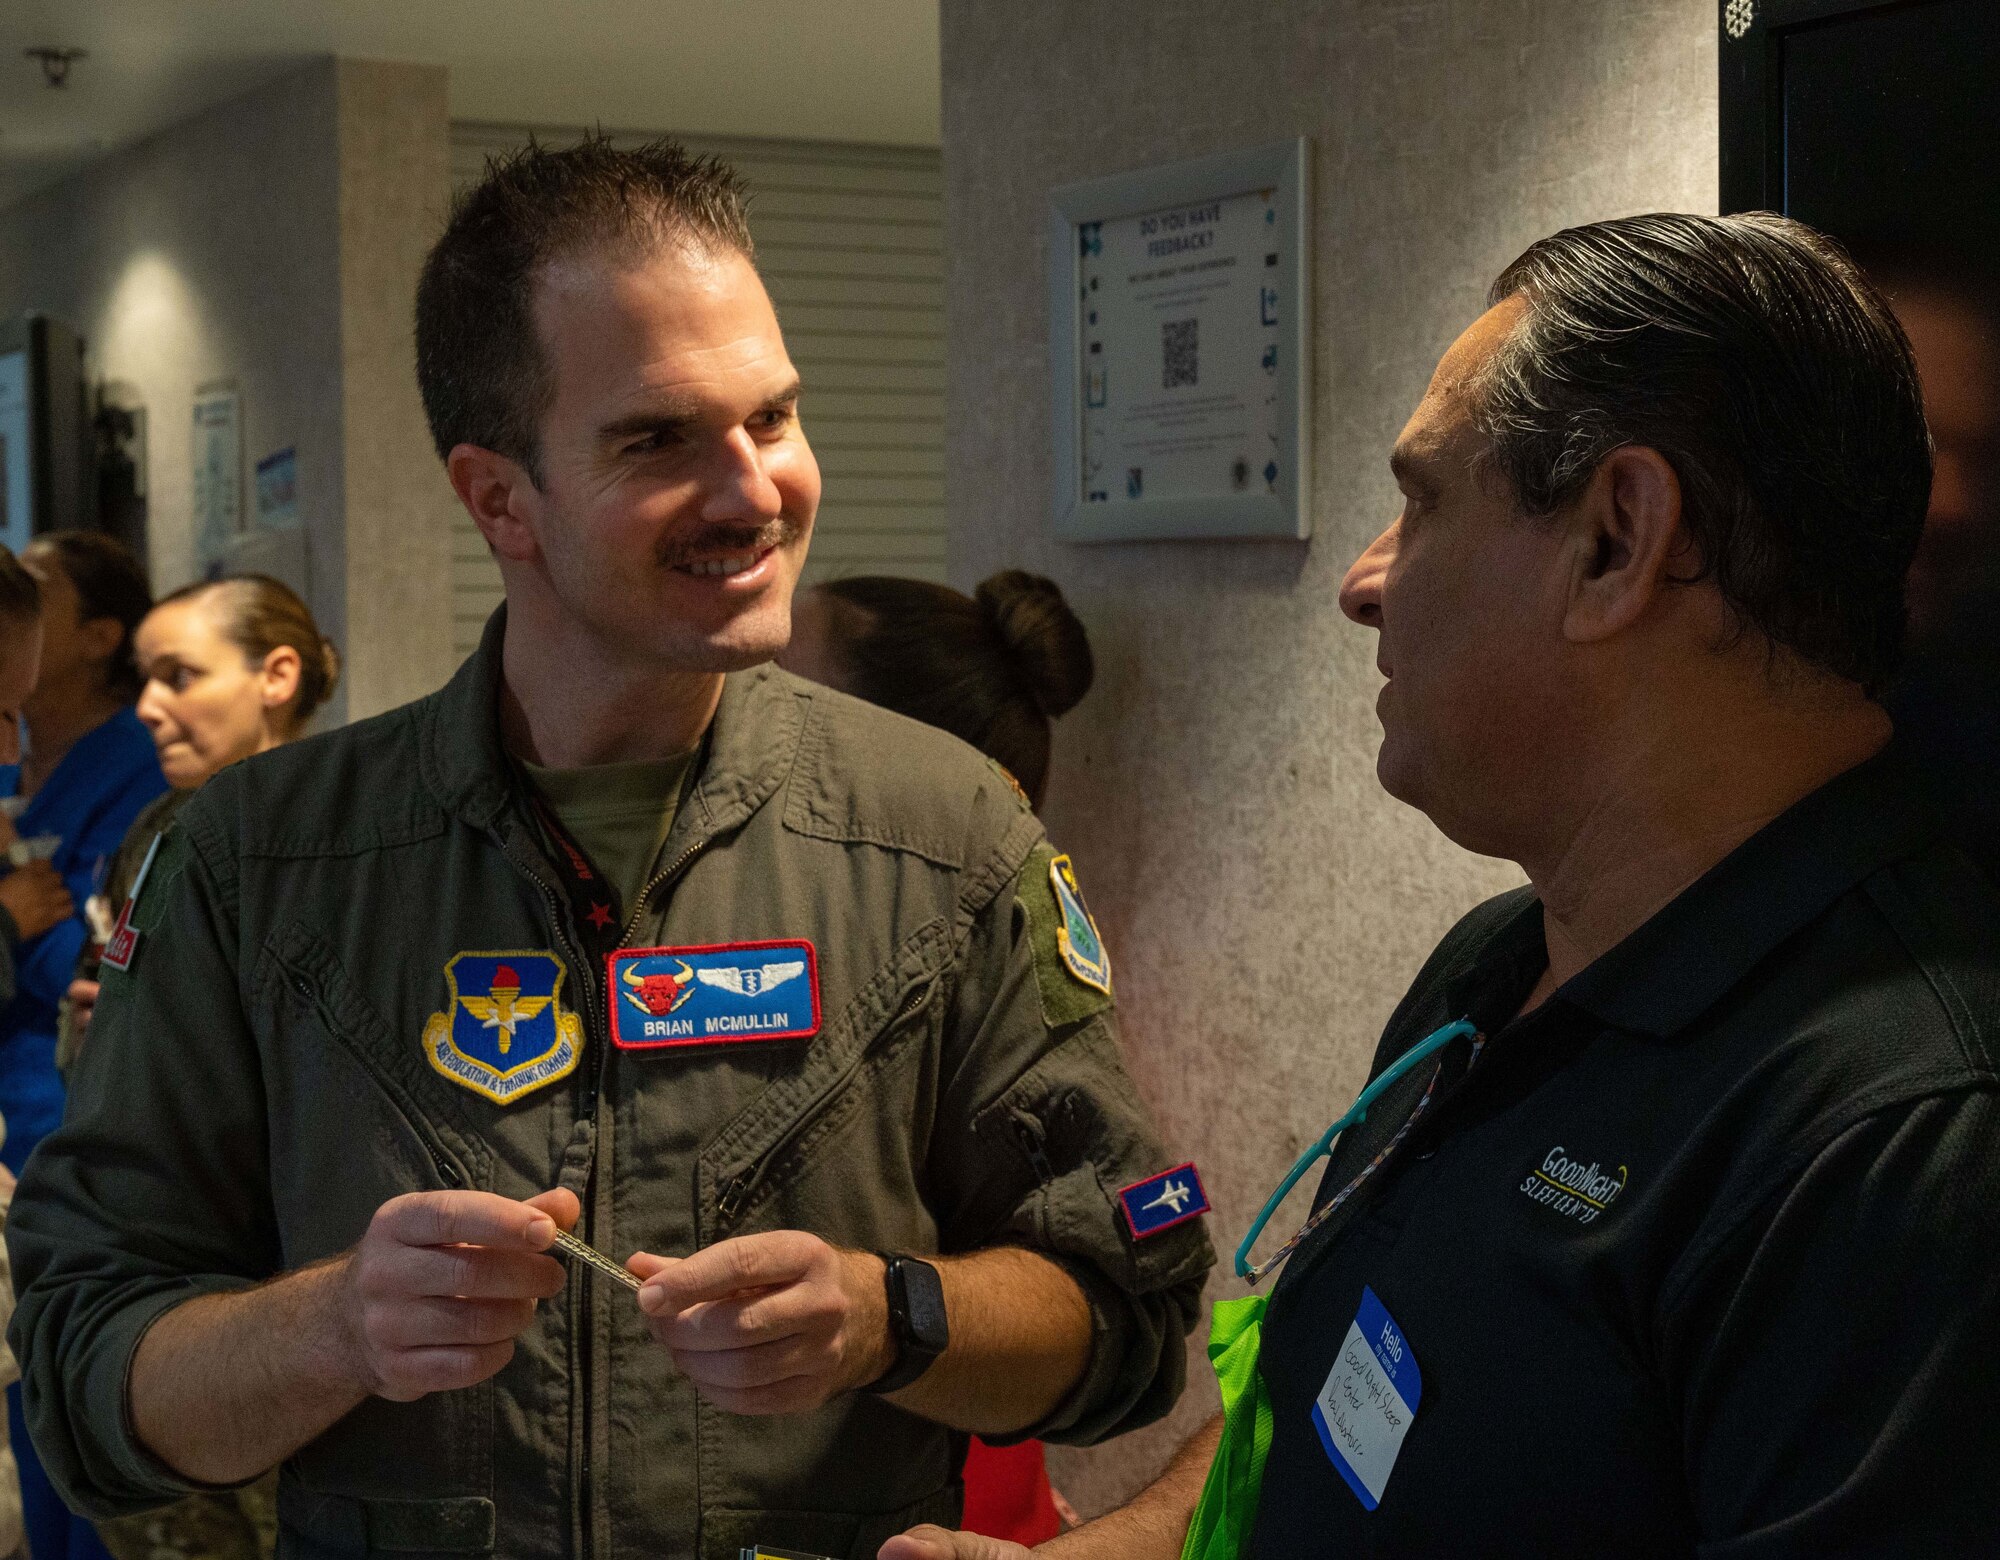 U.S. Air Force Major Brian McMullen, 47th Medical Group chief of aerospace medicine, talks with a medical service provider from the local community at the Humana Military Open House on Nov. 16, 2022, at Laughlin Air Force Base, Texas. The open house gives an opportunity for military medical service providers and local medical service providers to connect and build a better understanding of how everyone operates.  (U.S. Air Force photo by Senior Airman Nicholas Larsen)